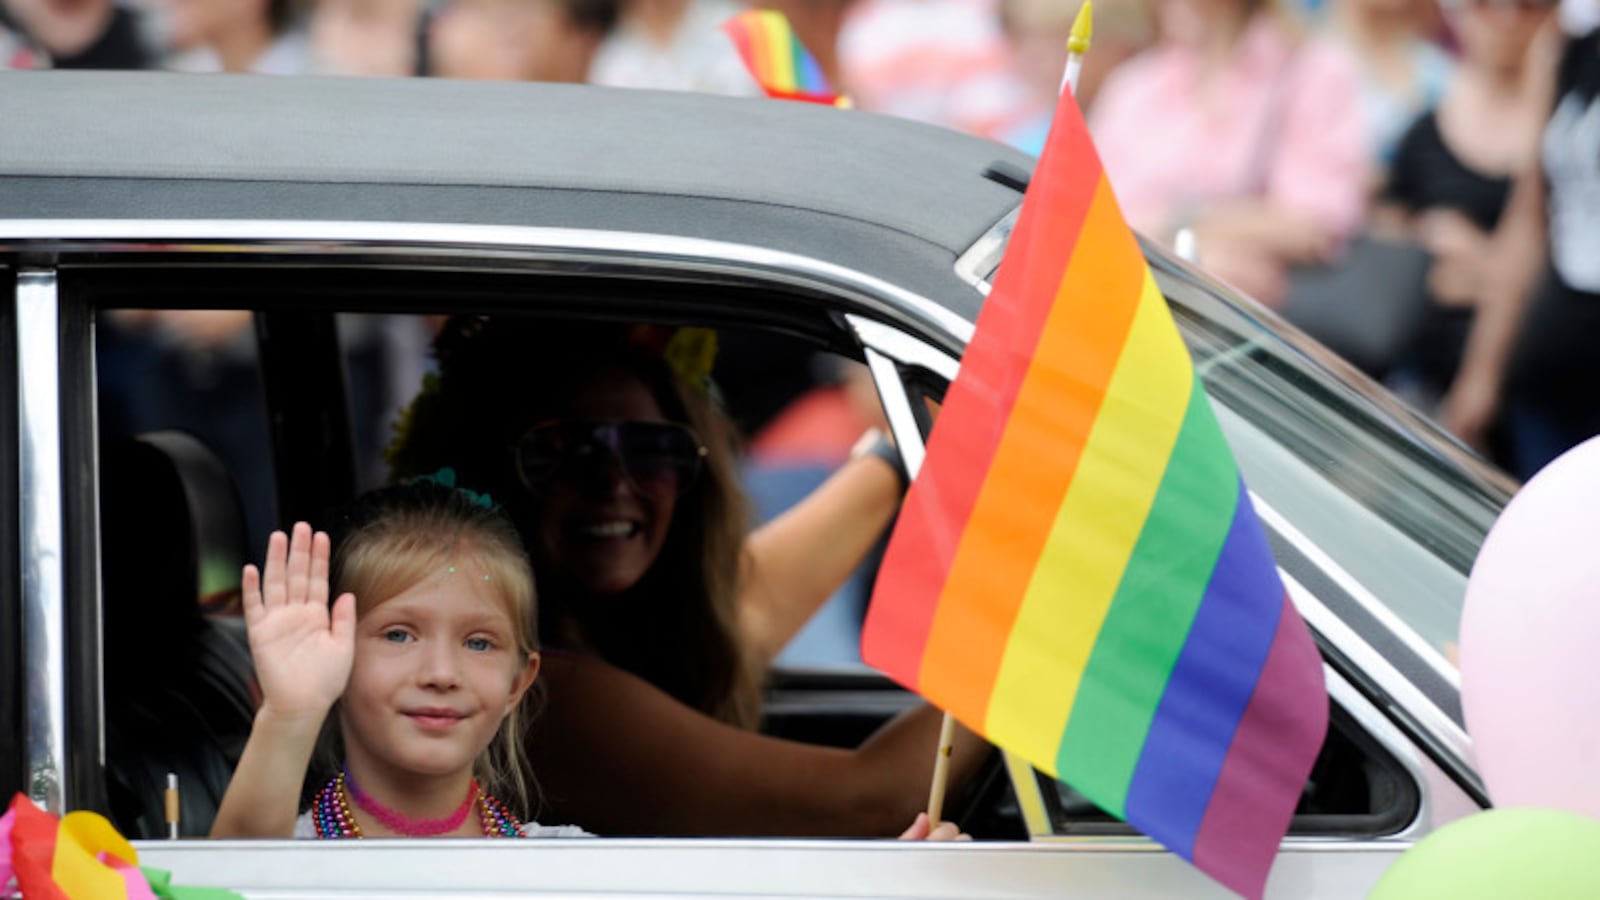 A child waves a a rainbow flag out of a window during the Denver Pride Parade along Colfax Avenue in 2018.